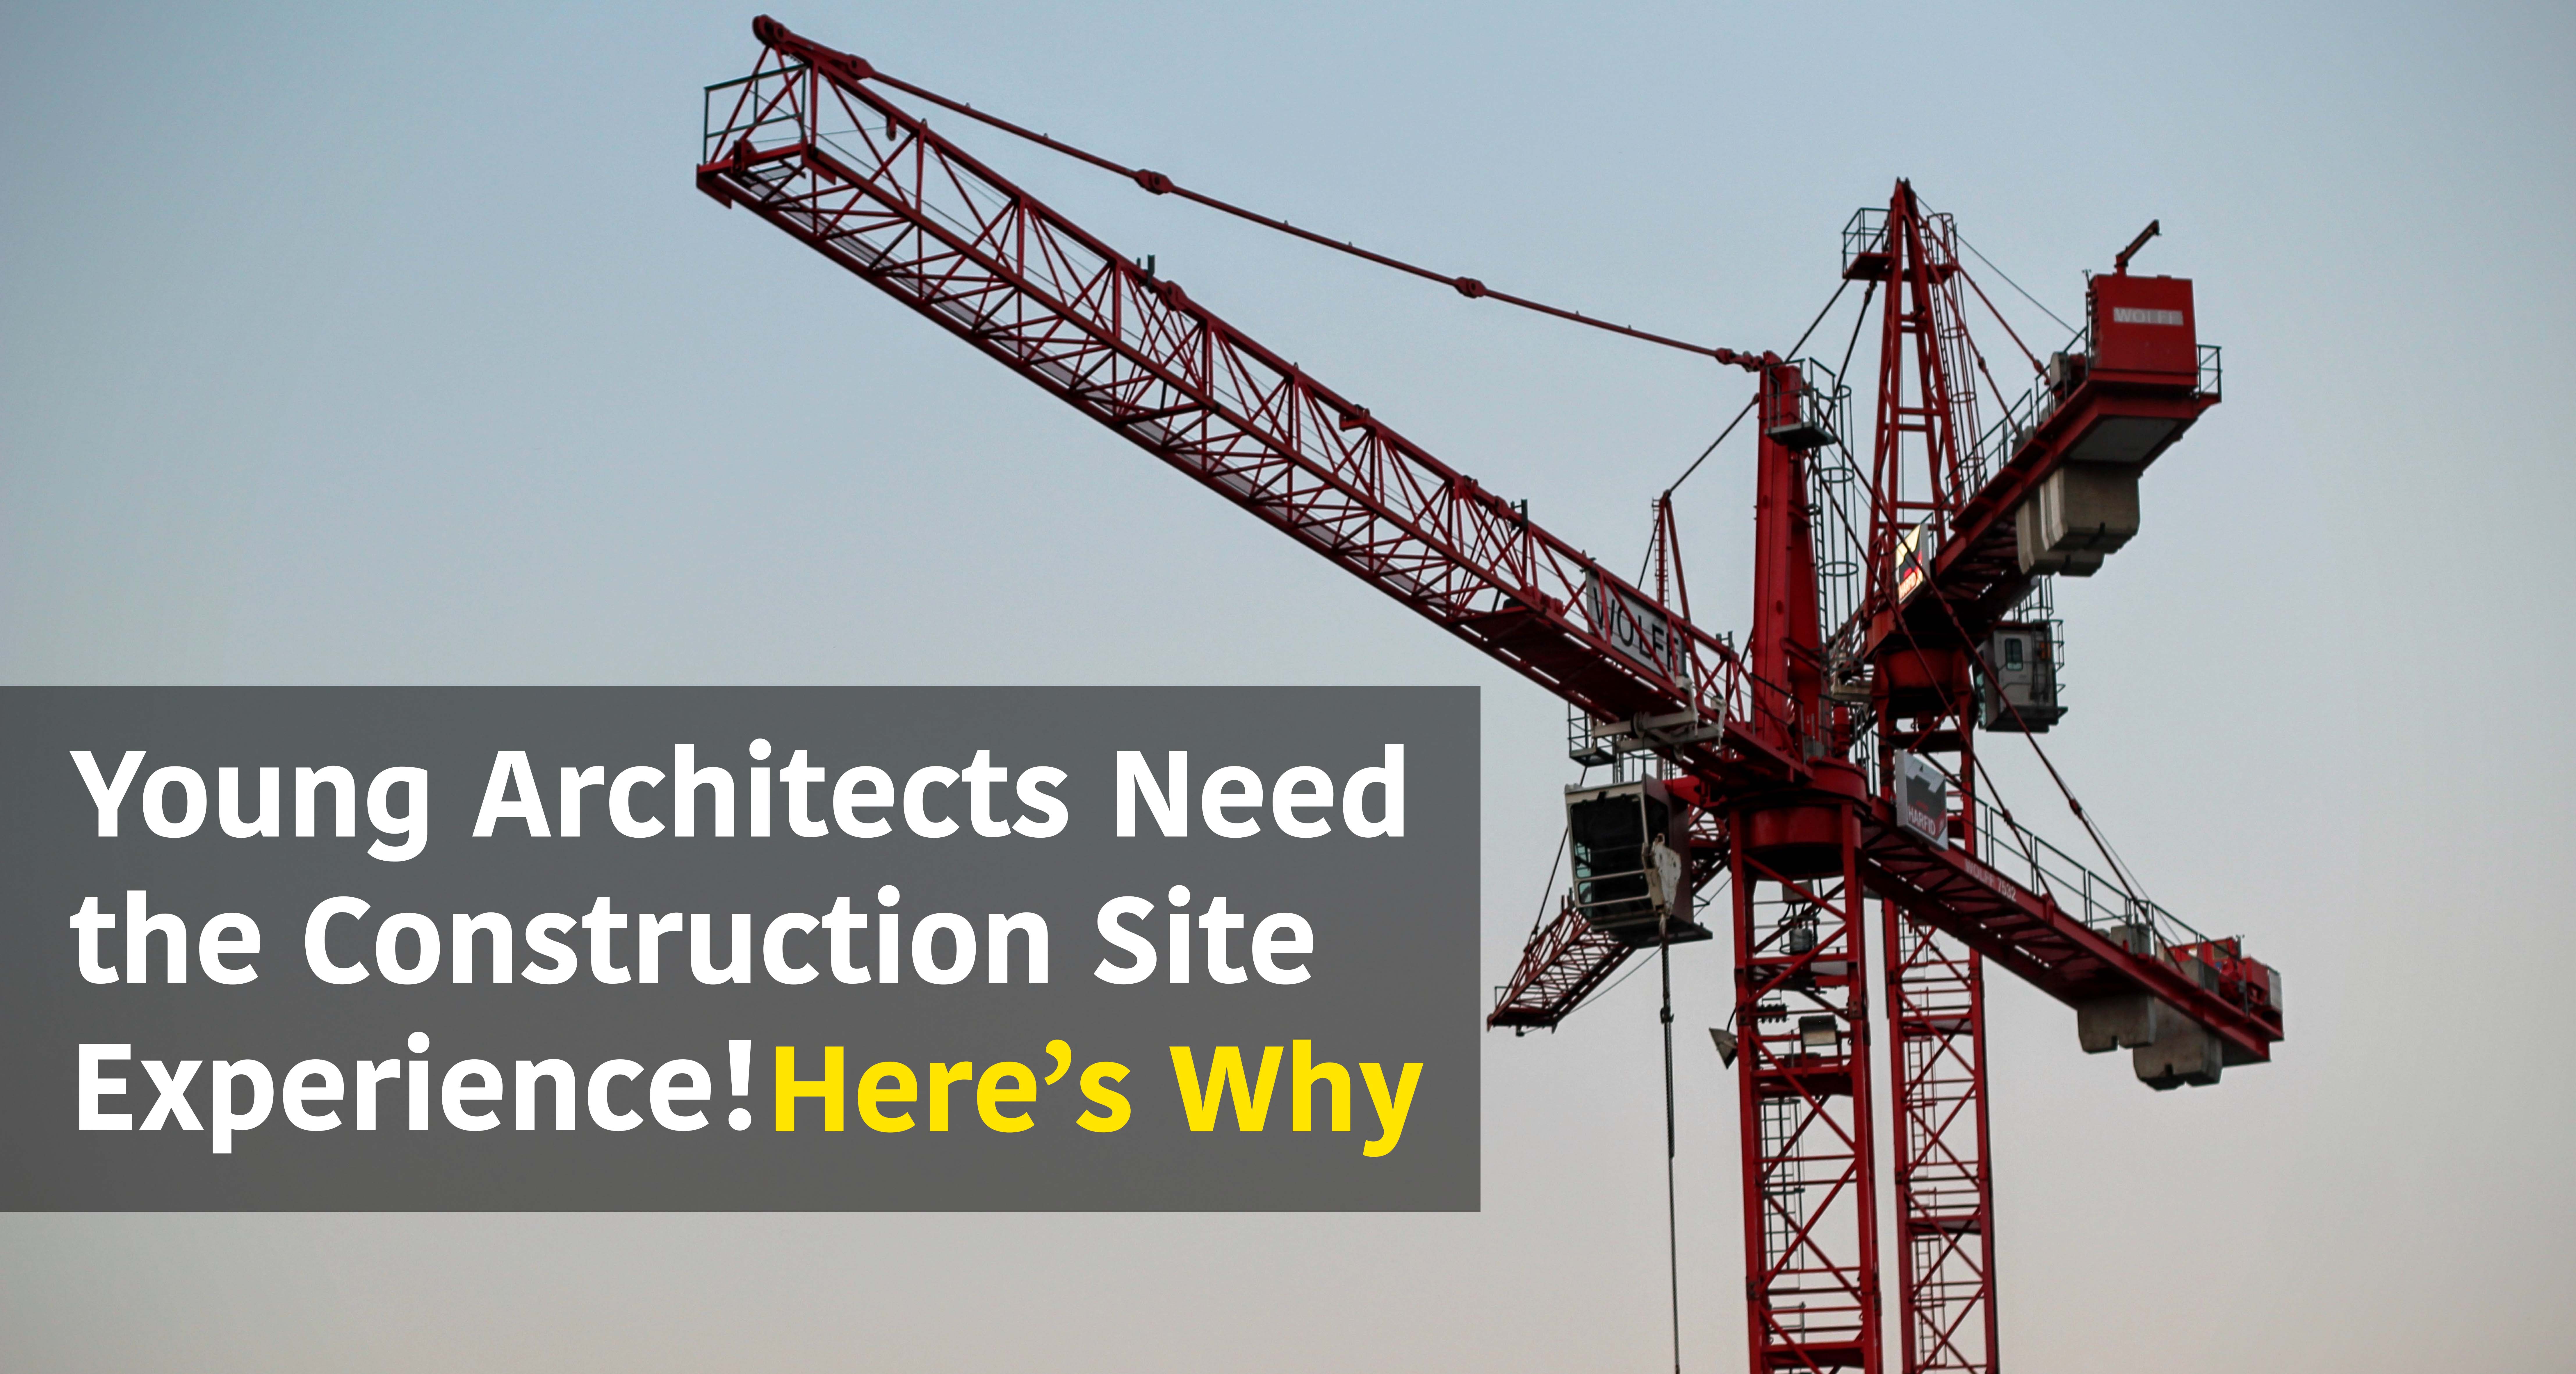 Here's Why Young Architects Need the Construction Site Experience ...